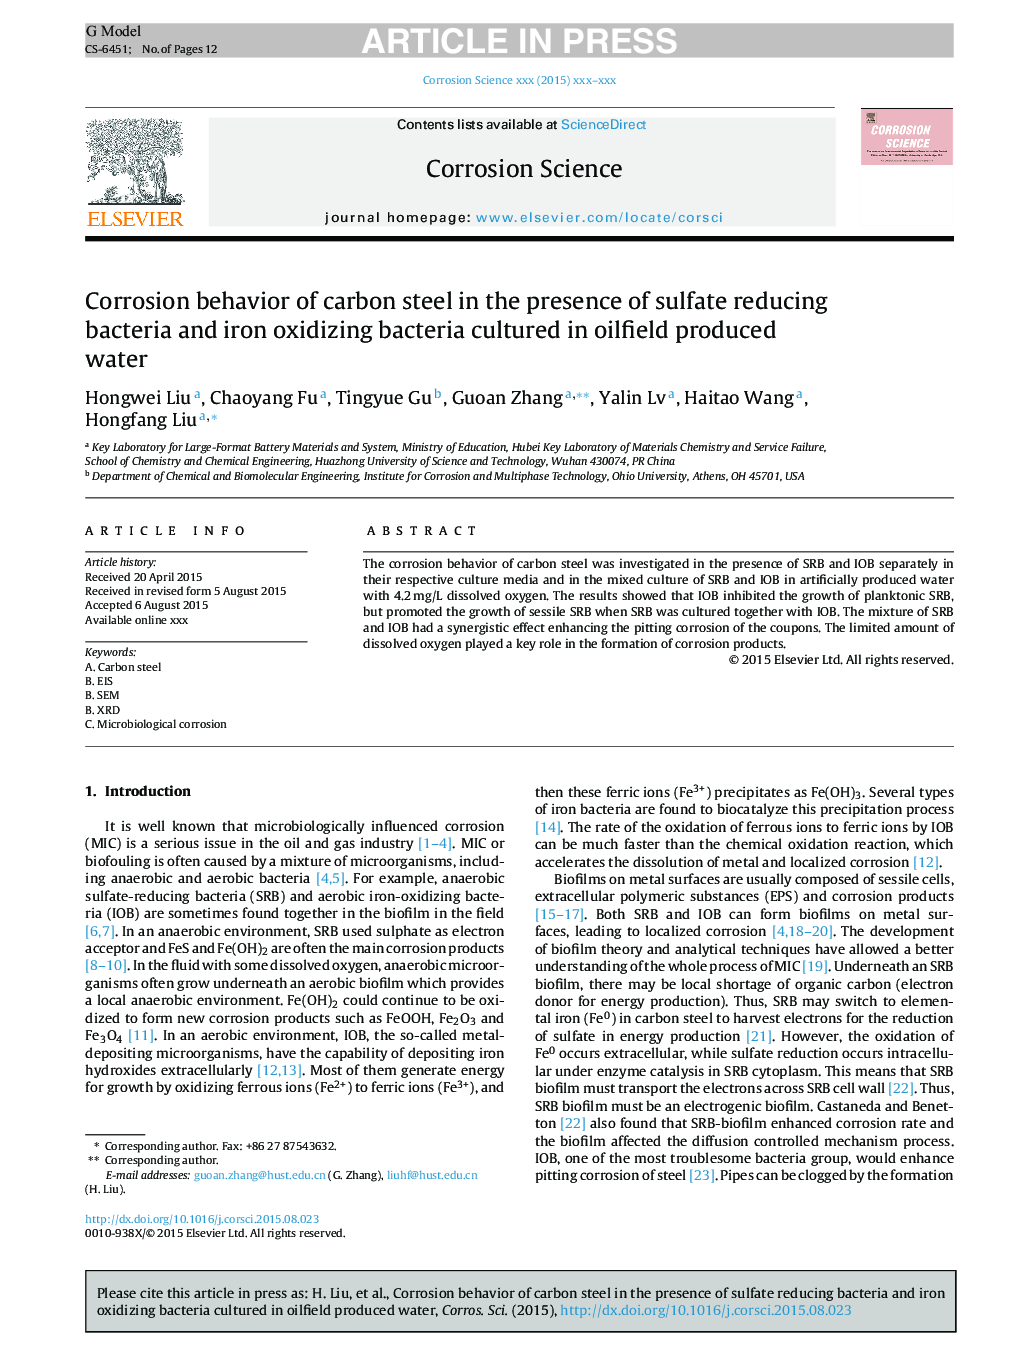 Corrosion behavior of carbon steel in the presence of sulfate reducing bacteria and iron oxidizing bacteria cultured in oilfield produced water